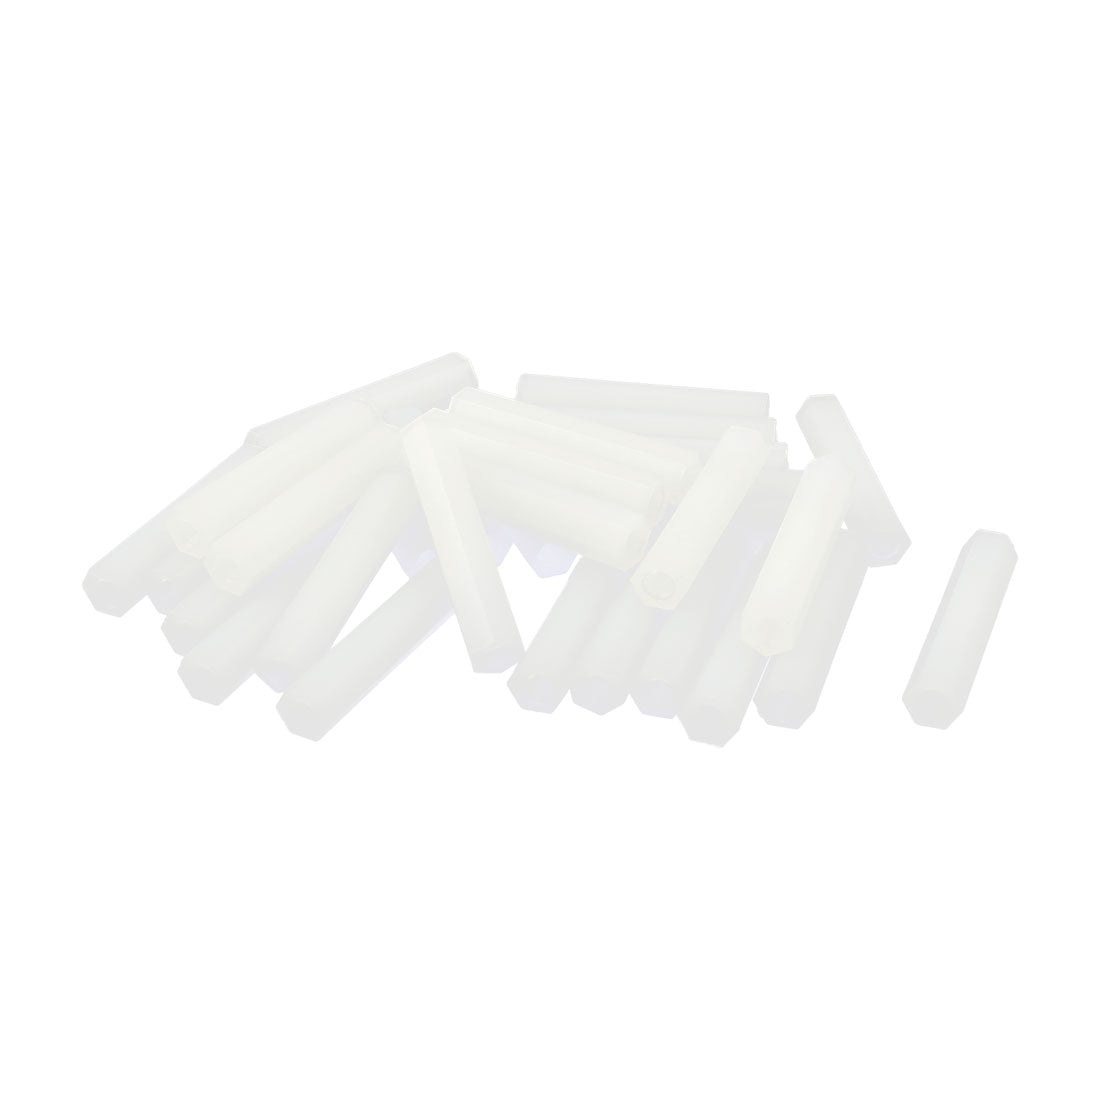 uxcell Uxcell 30mm M3 Female Thread White Nylon Hex PCB Spacer Standoff Nut Pillar Pack of 20